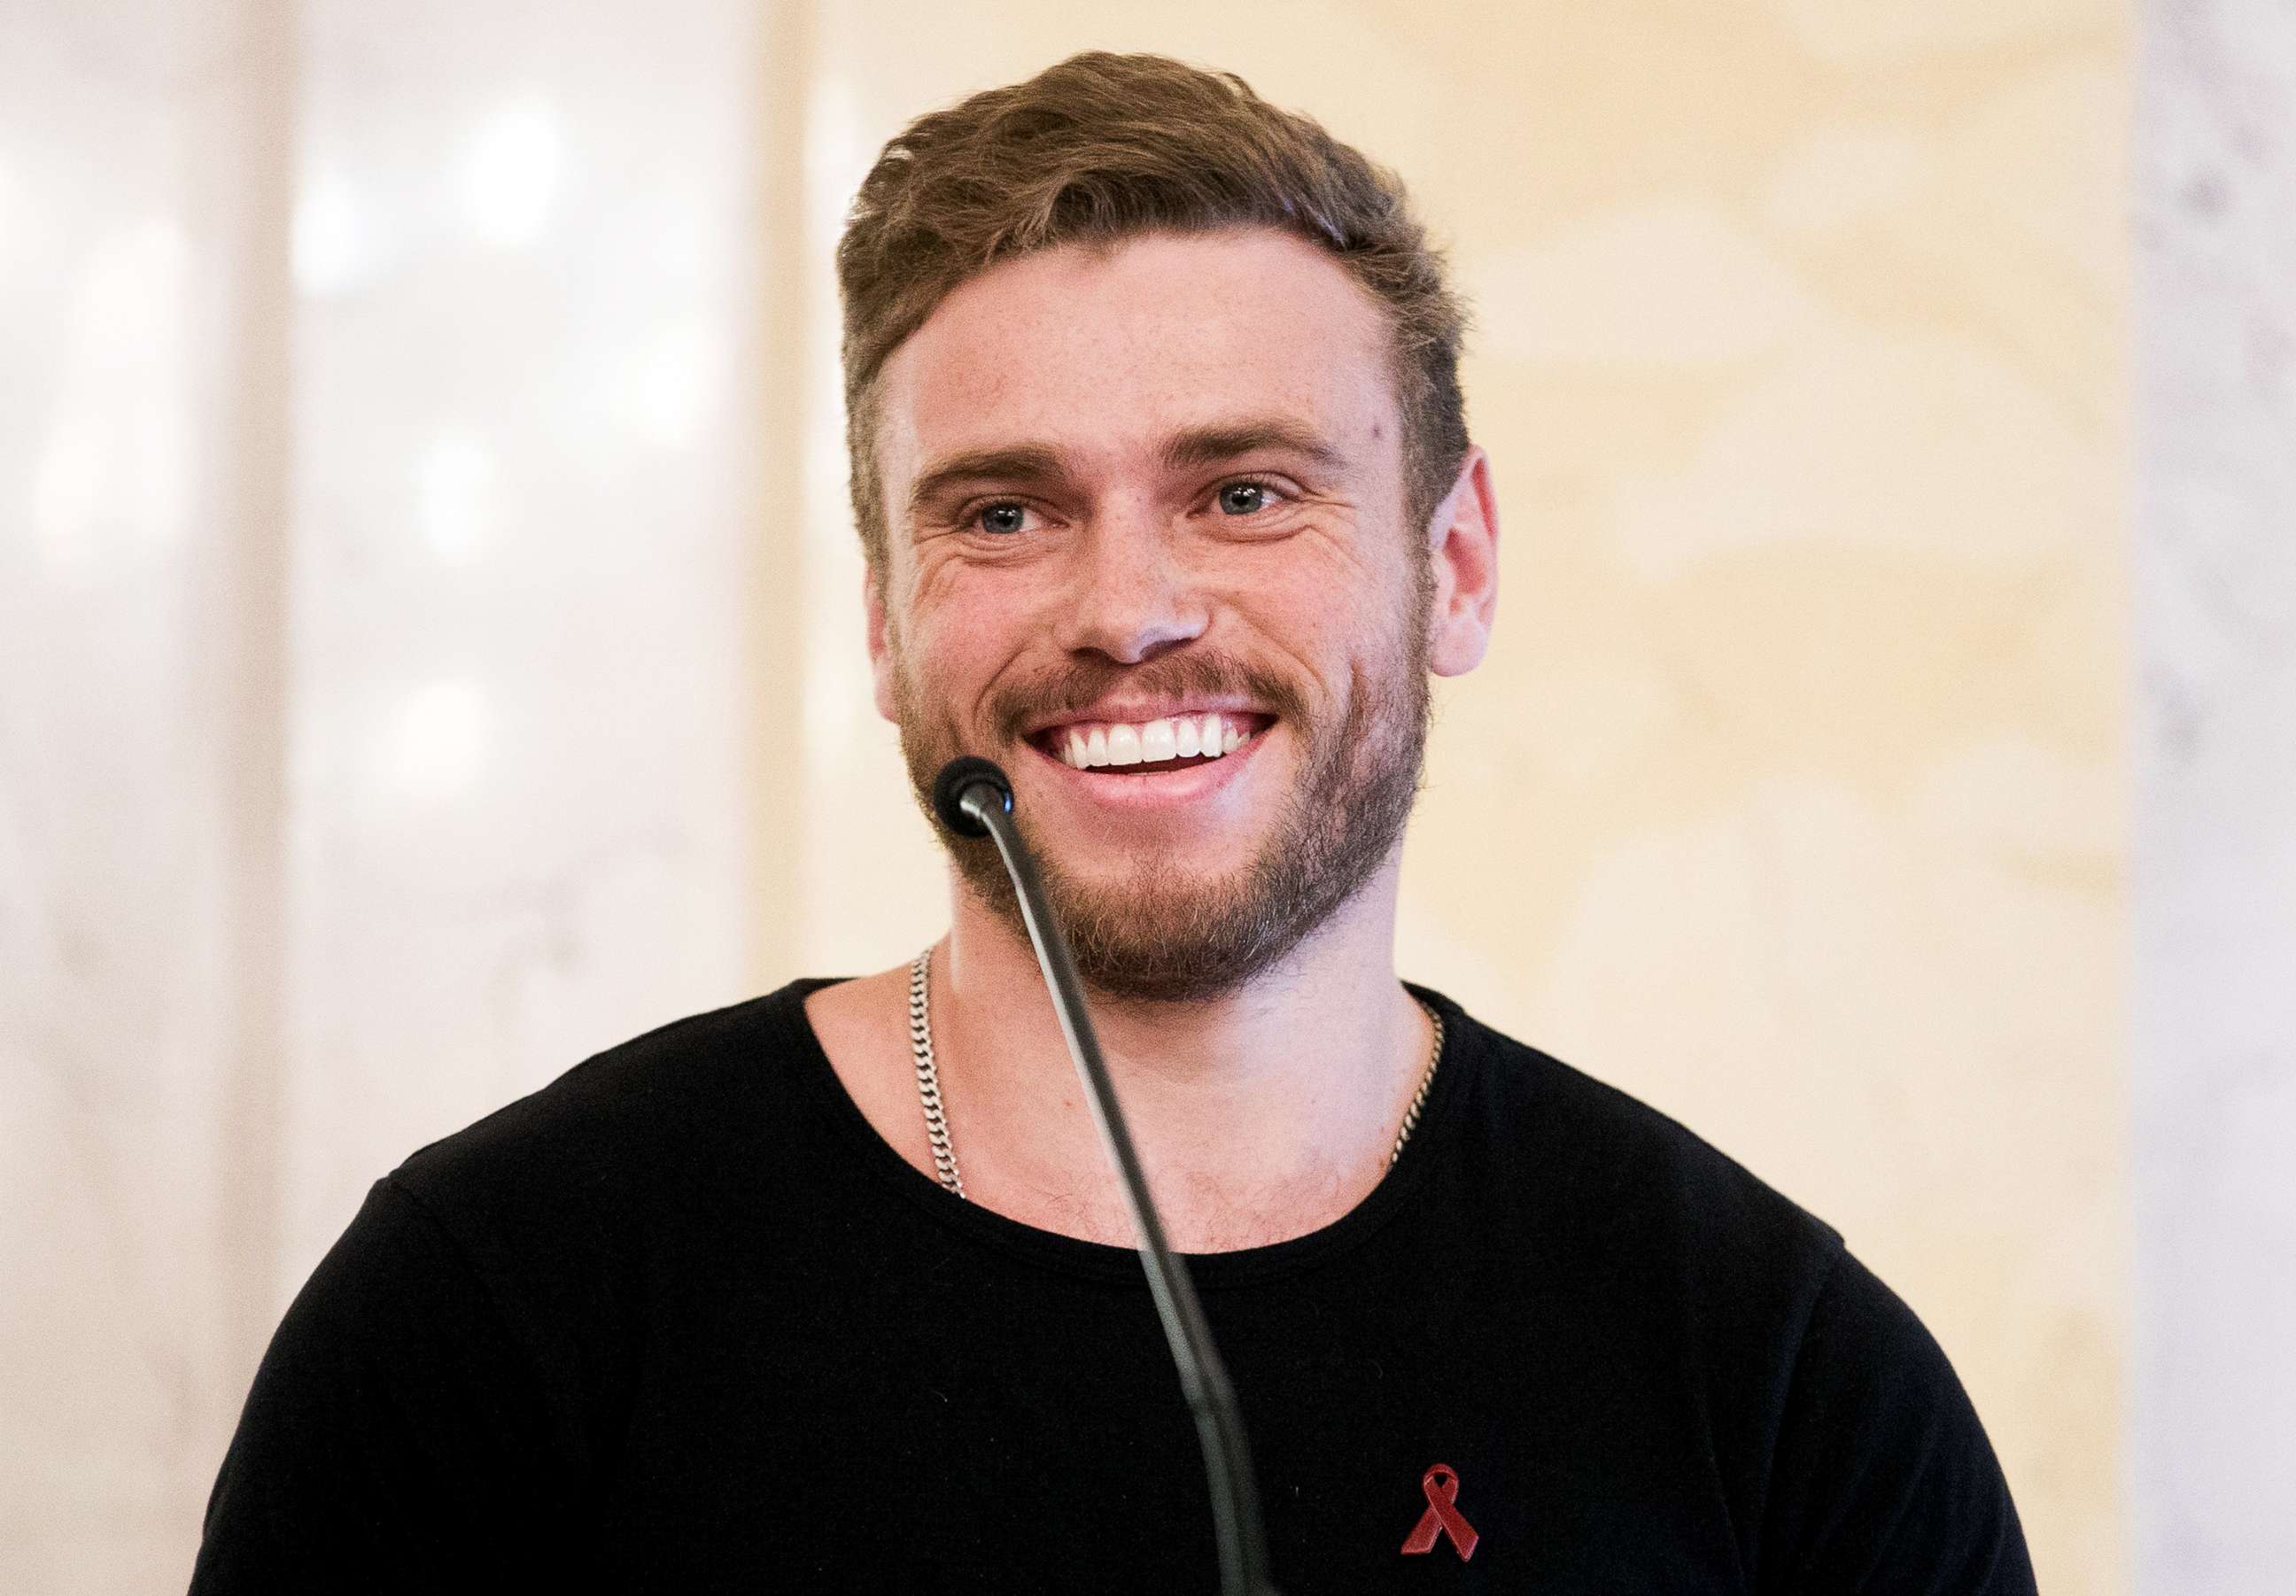 PHOTO: Gus Kenworthy attends the international Life Ball press conference on June 02, 2018.